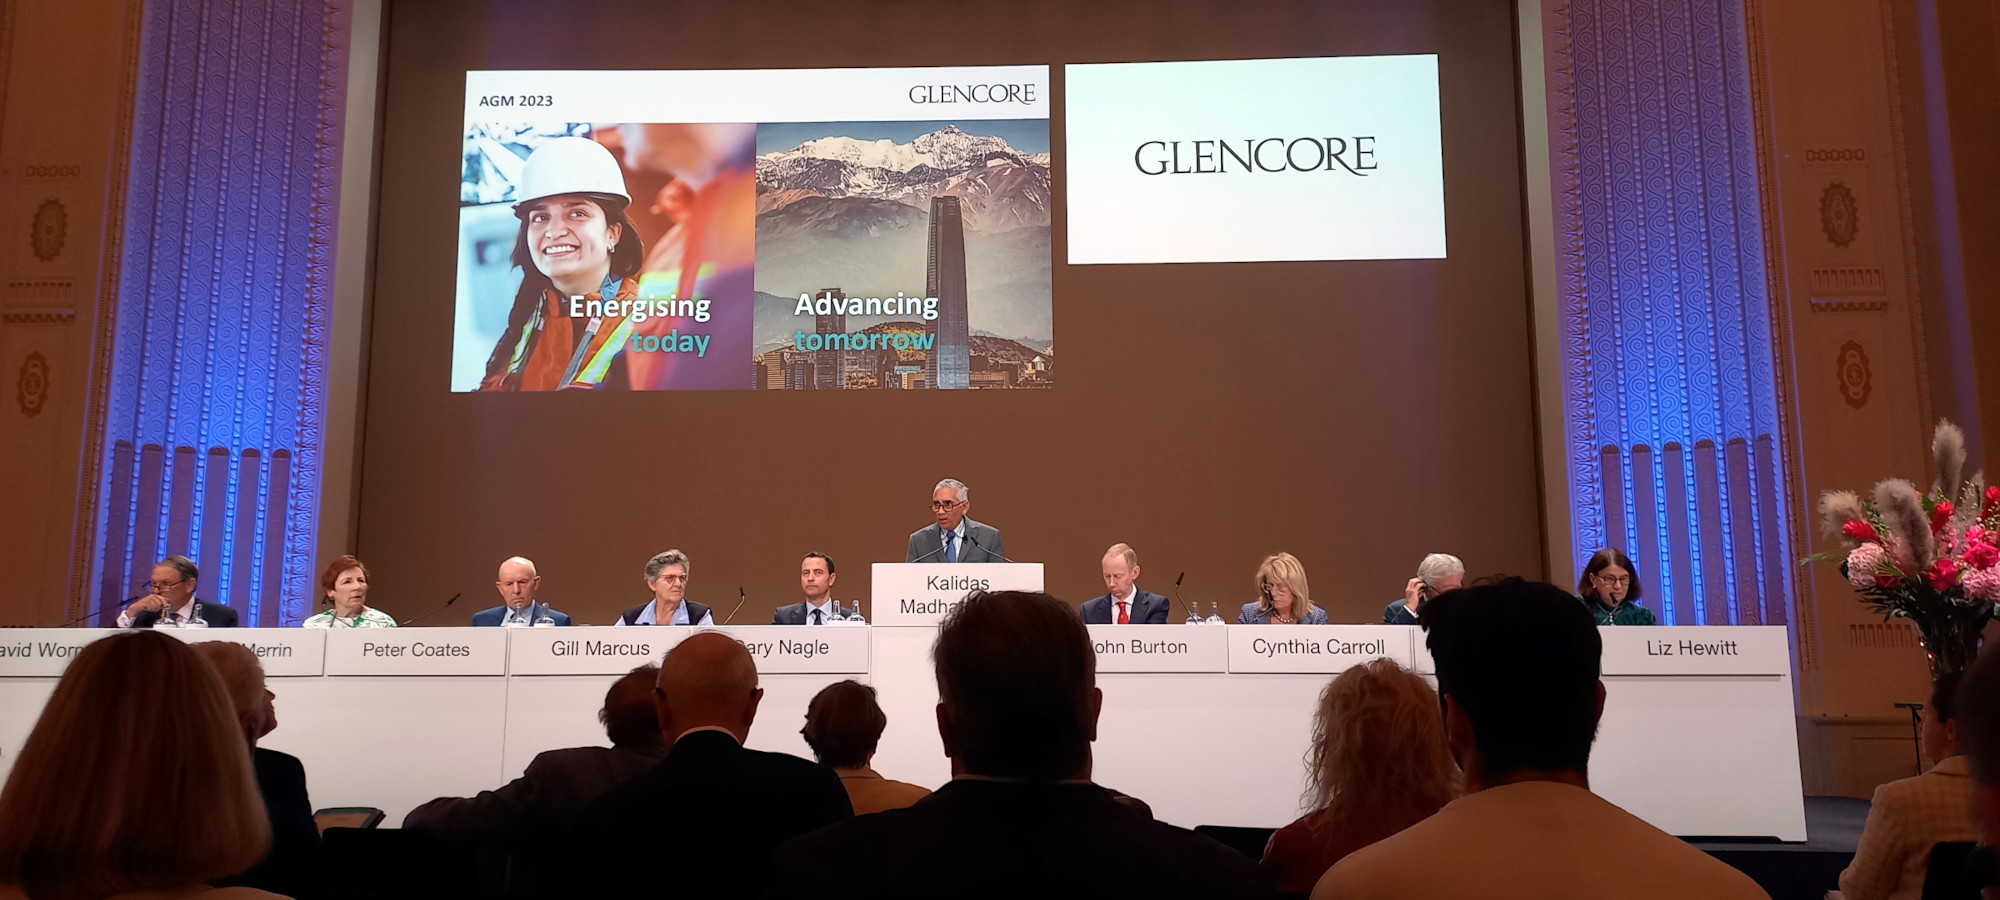 Glencore's board of directors, led by non-executive chairman Kalidas Madhavpeddi (center), addressed the report after introducing CEO Gary Nagle (pictured on his left); Cynthia Carroll (right); Liz Hewitt (right), Martin Gilbert, and David Wormsley, independent non-executive directors; Gill Marcus, senior independent director; Peter Coates, non-executive director; and Patrice Merrin, non-executive director. Photo: Andrés Gómez